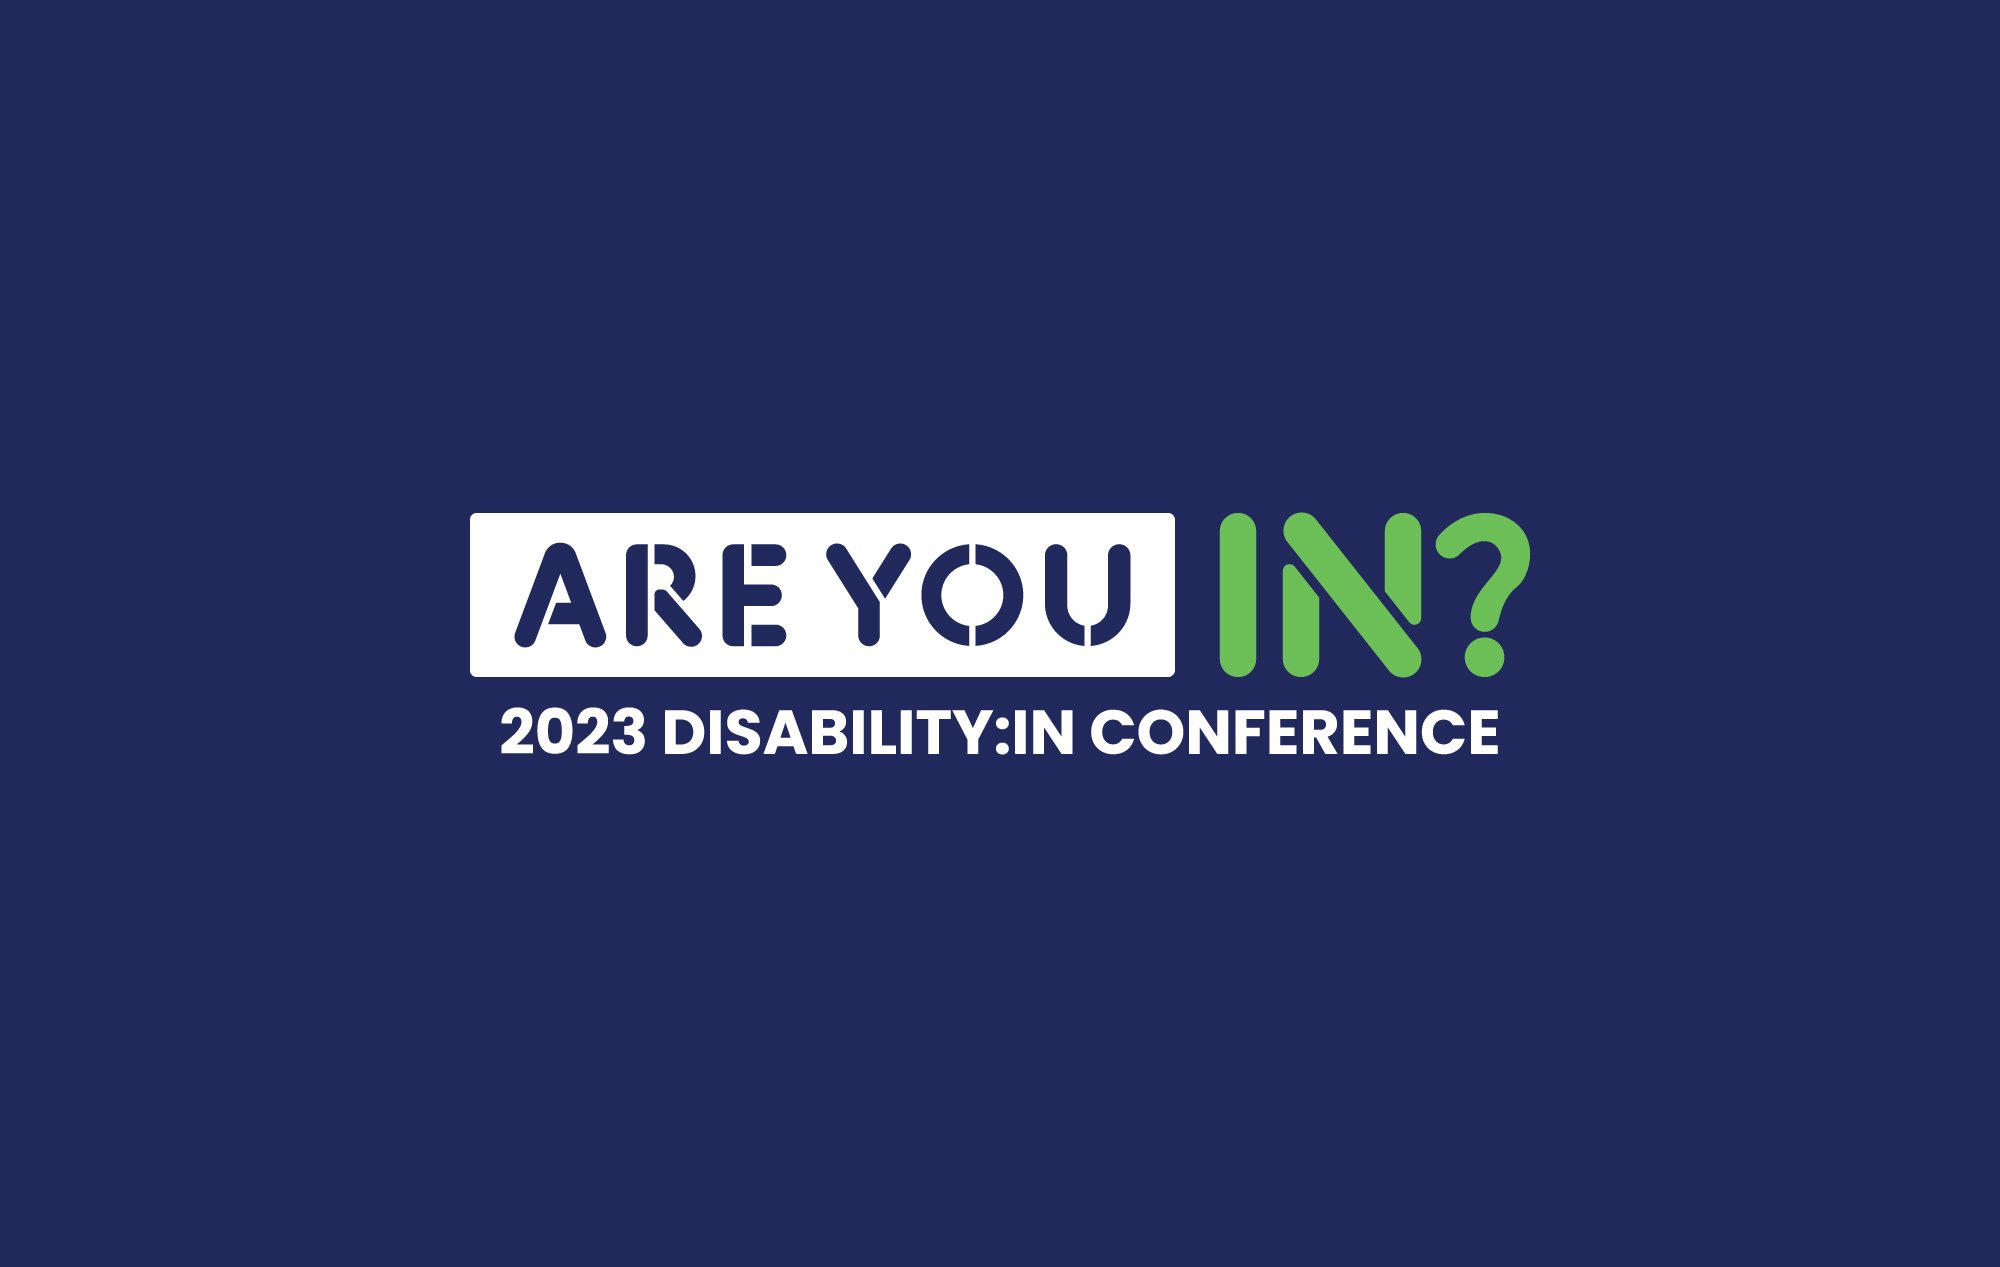 The 2023 Disability:IN Conference logo on a field of navy blue.